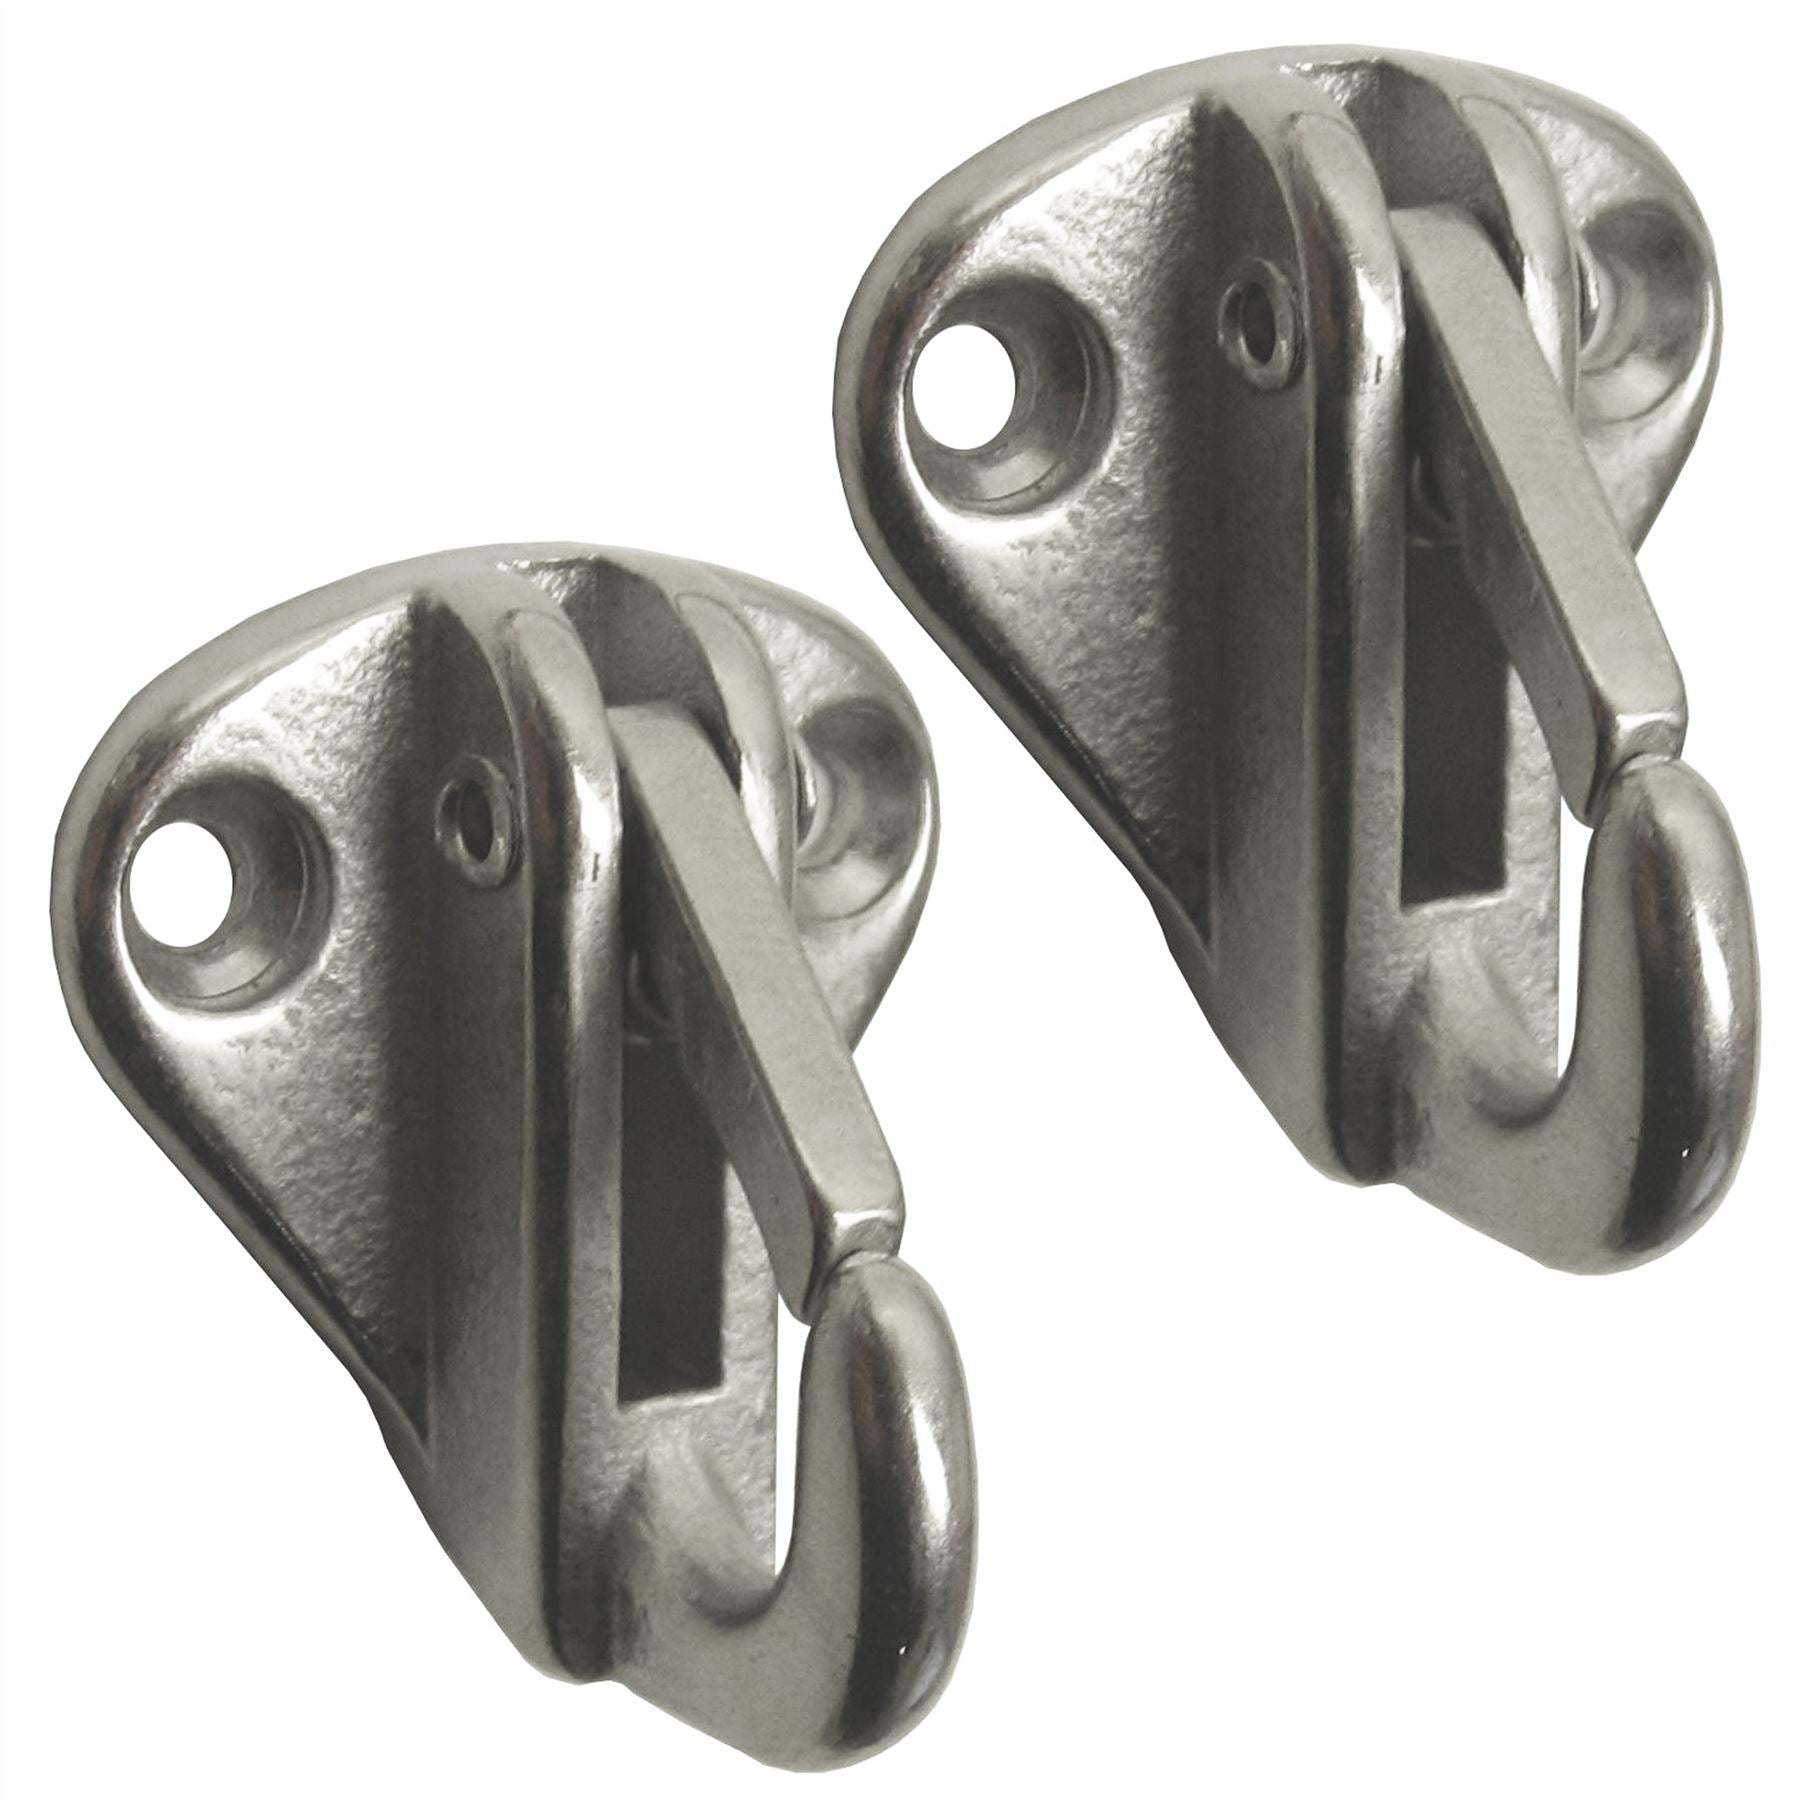 Fender Hook Snap Type With Spring Catch Stainless Steel Marine Grade